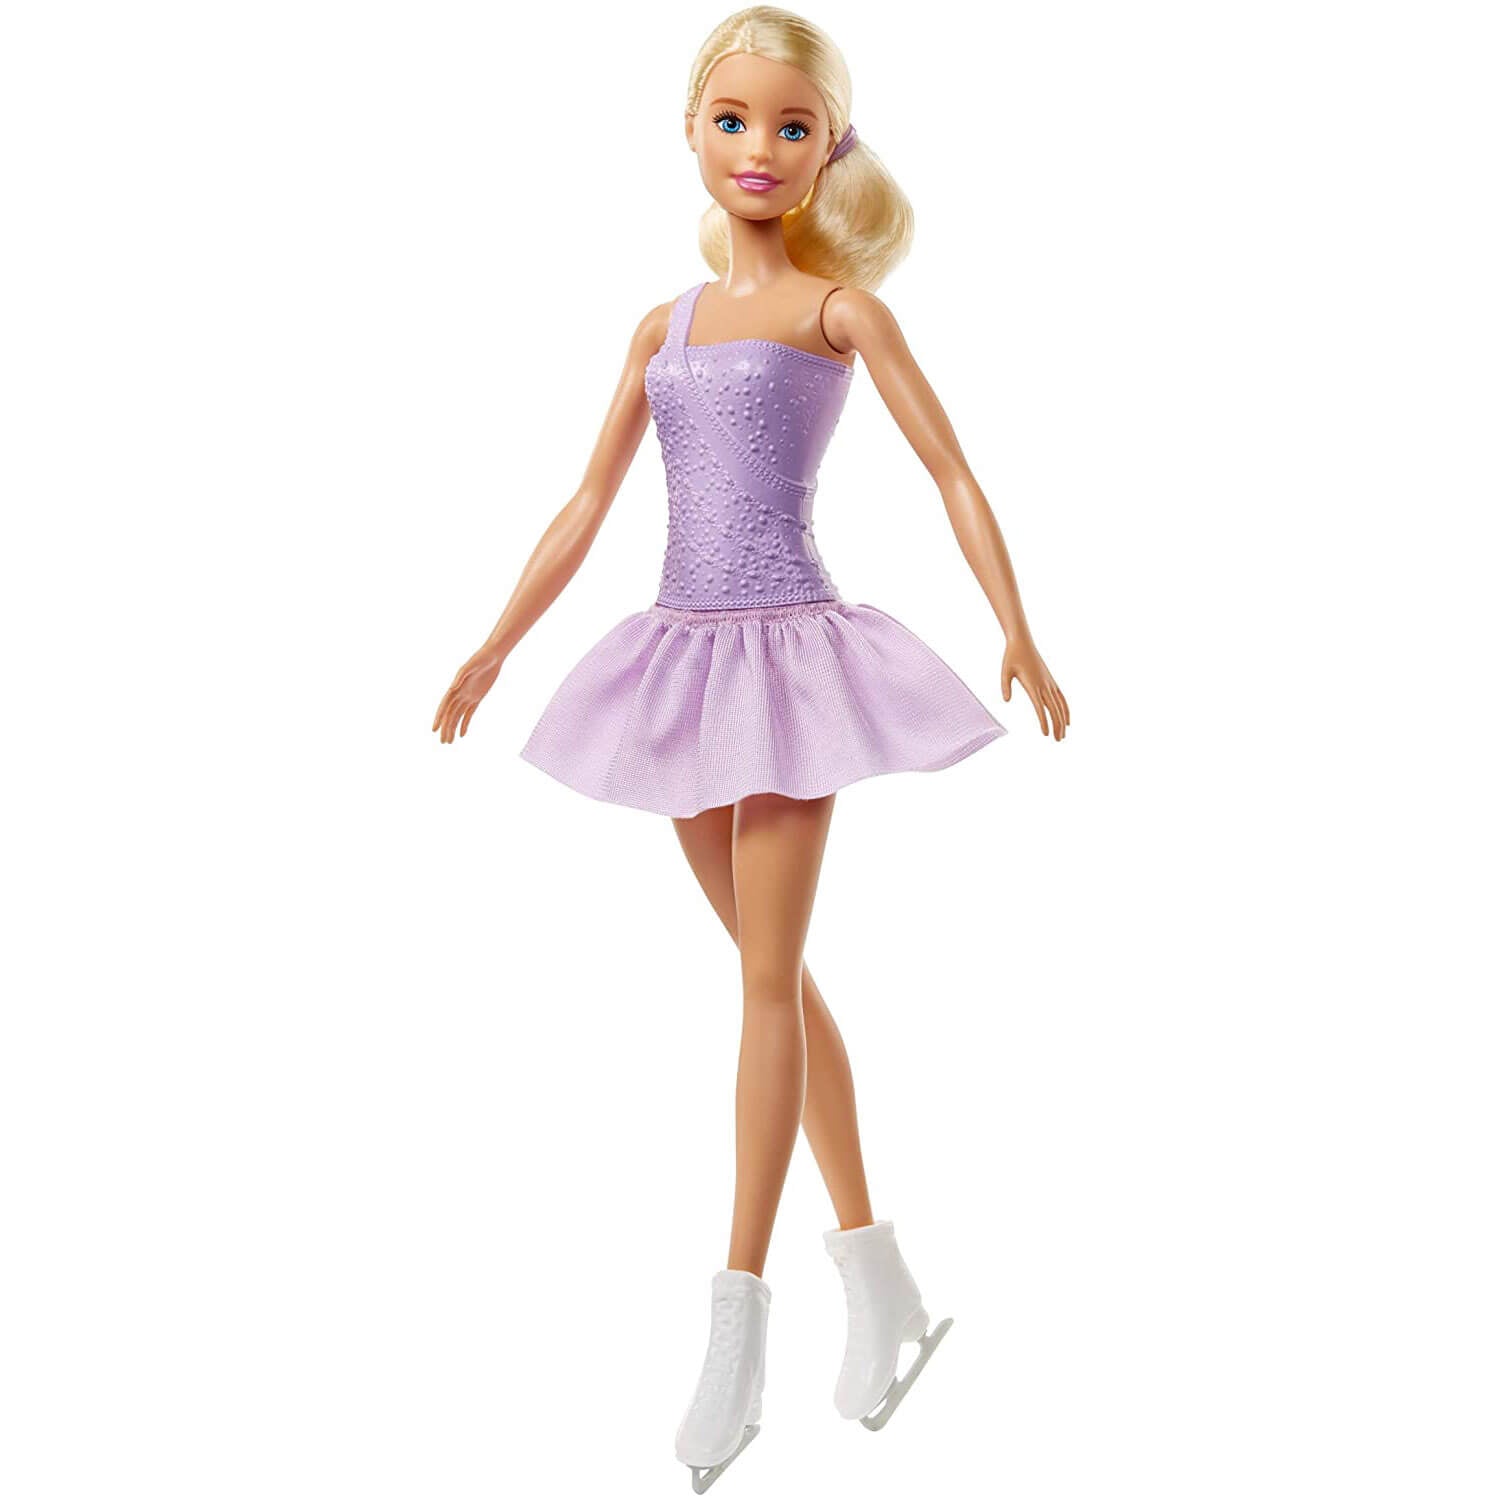 Barbie You Can Be Anything Figure Skater Doll